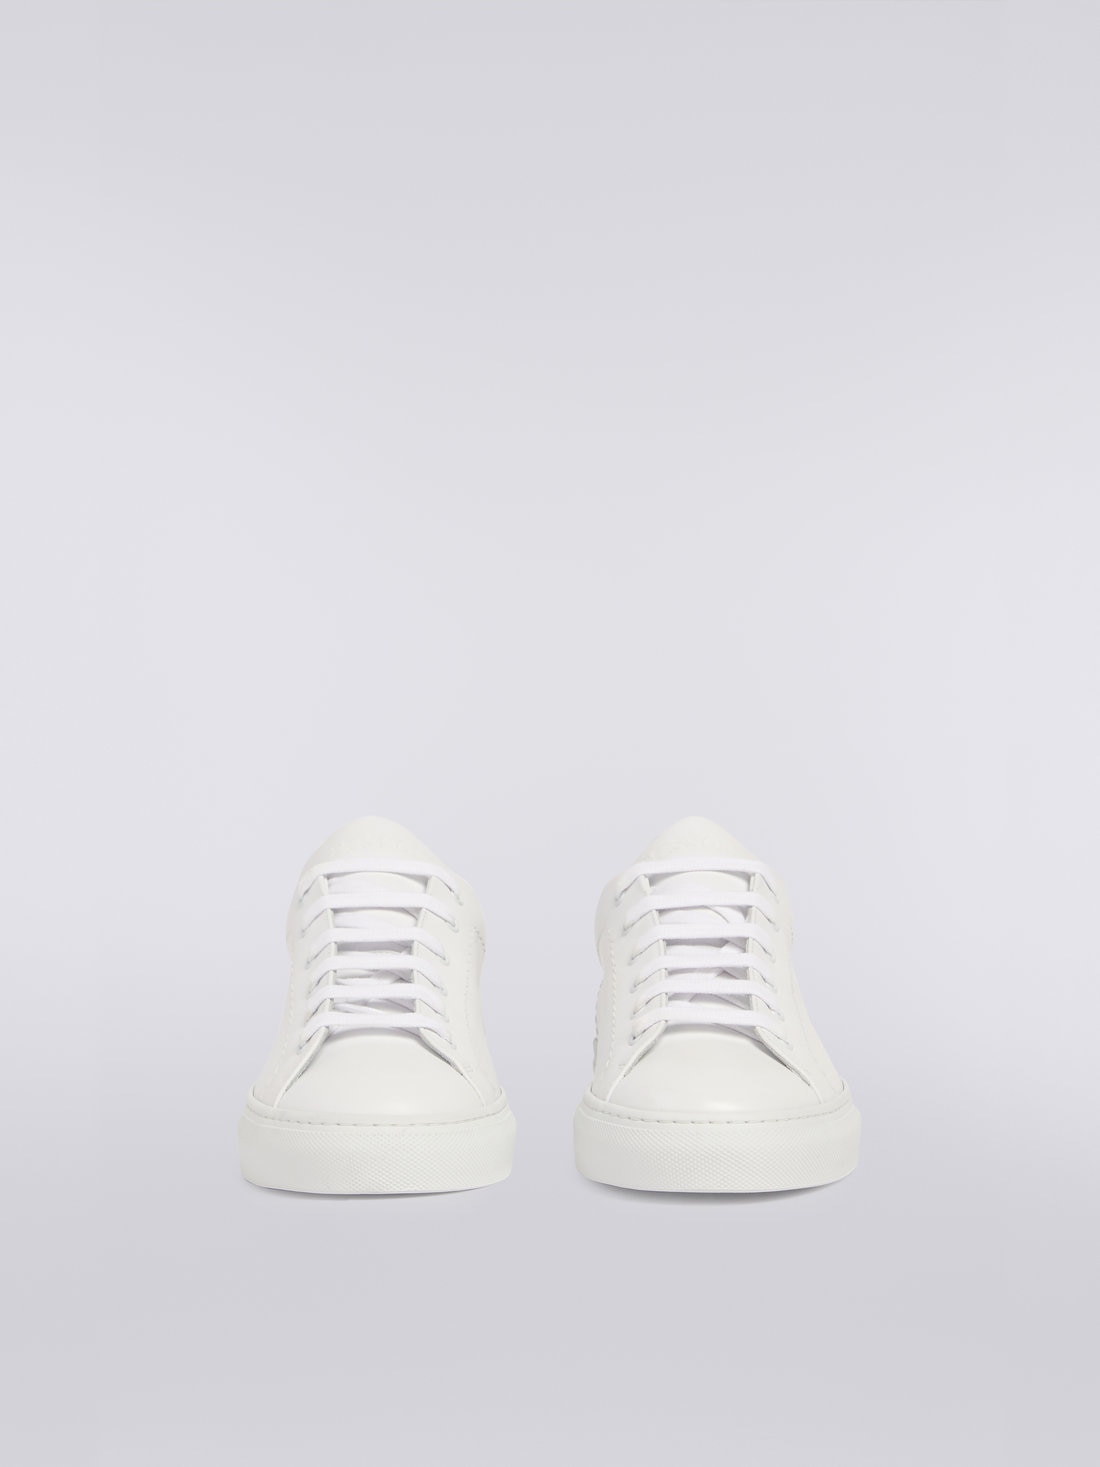 Leather trainers with slub insert, White  - OC23WY00BL007US0191 - 2